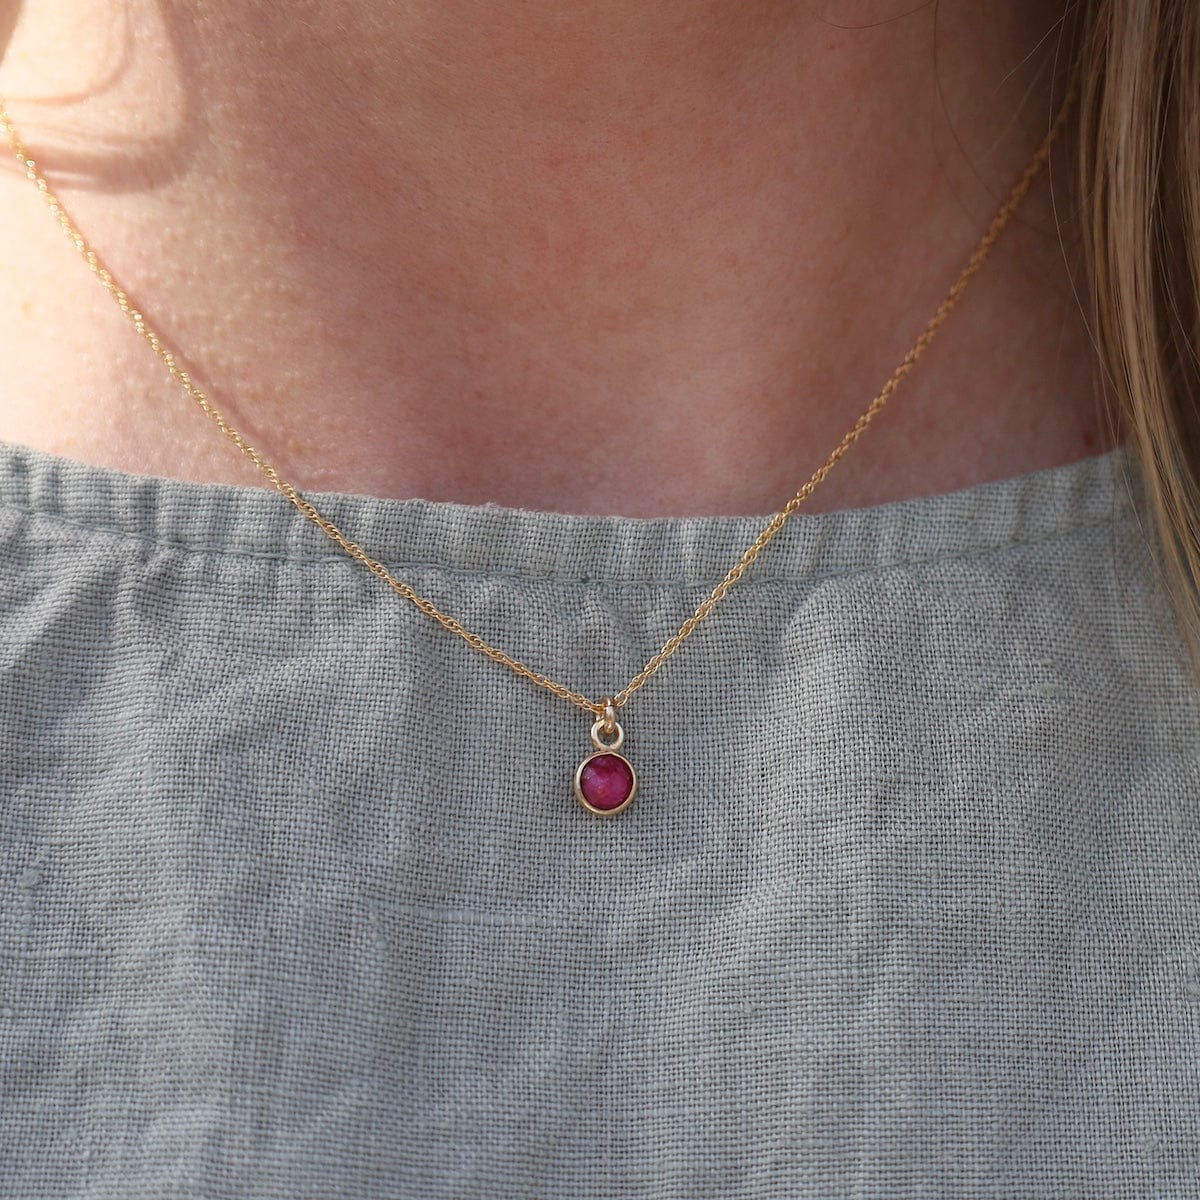 NKL-GF 14k Gold Filled Chain with 6mm Bezel-Set Dyed Ruby